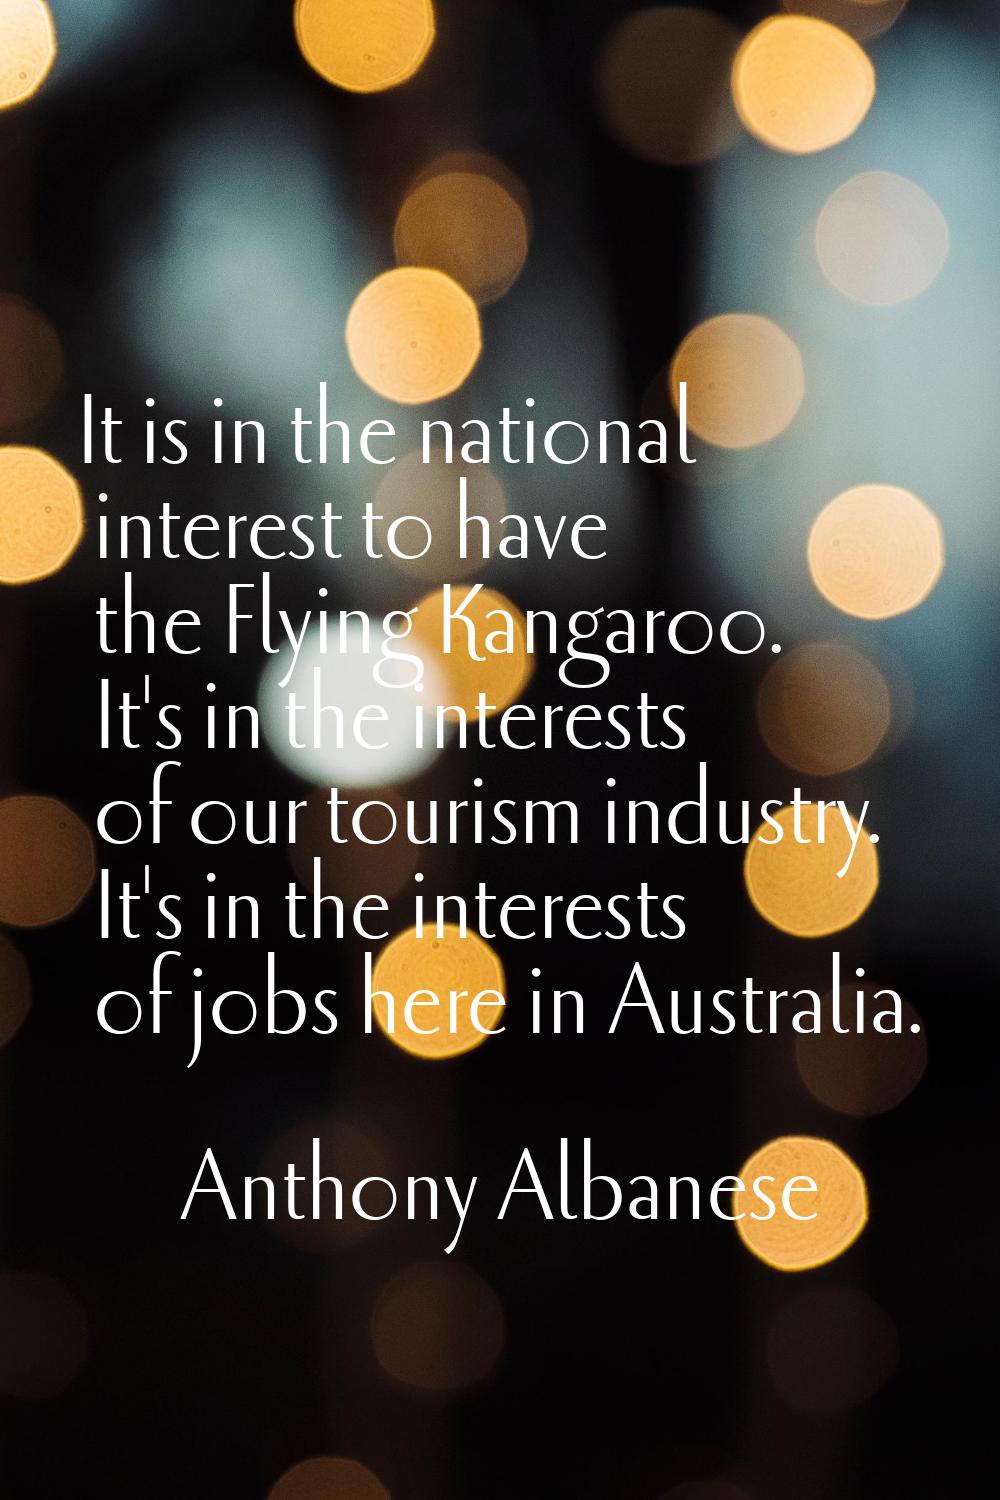 It is in the national interest to have the Flying Kangaroo. It's in the interests of our tourism in